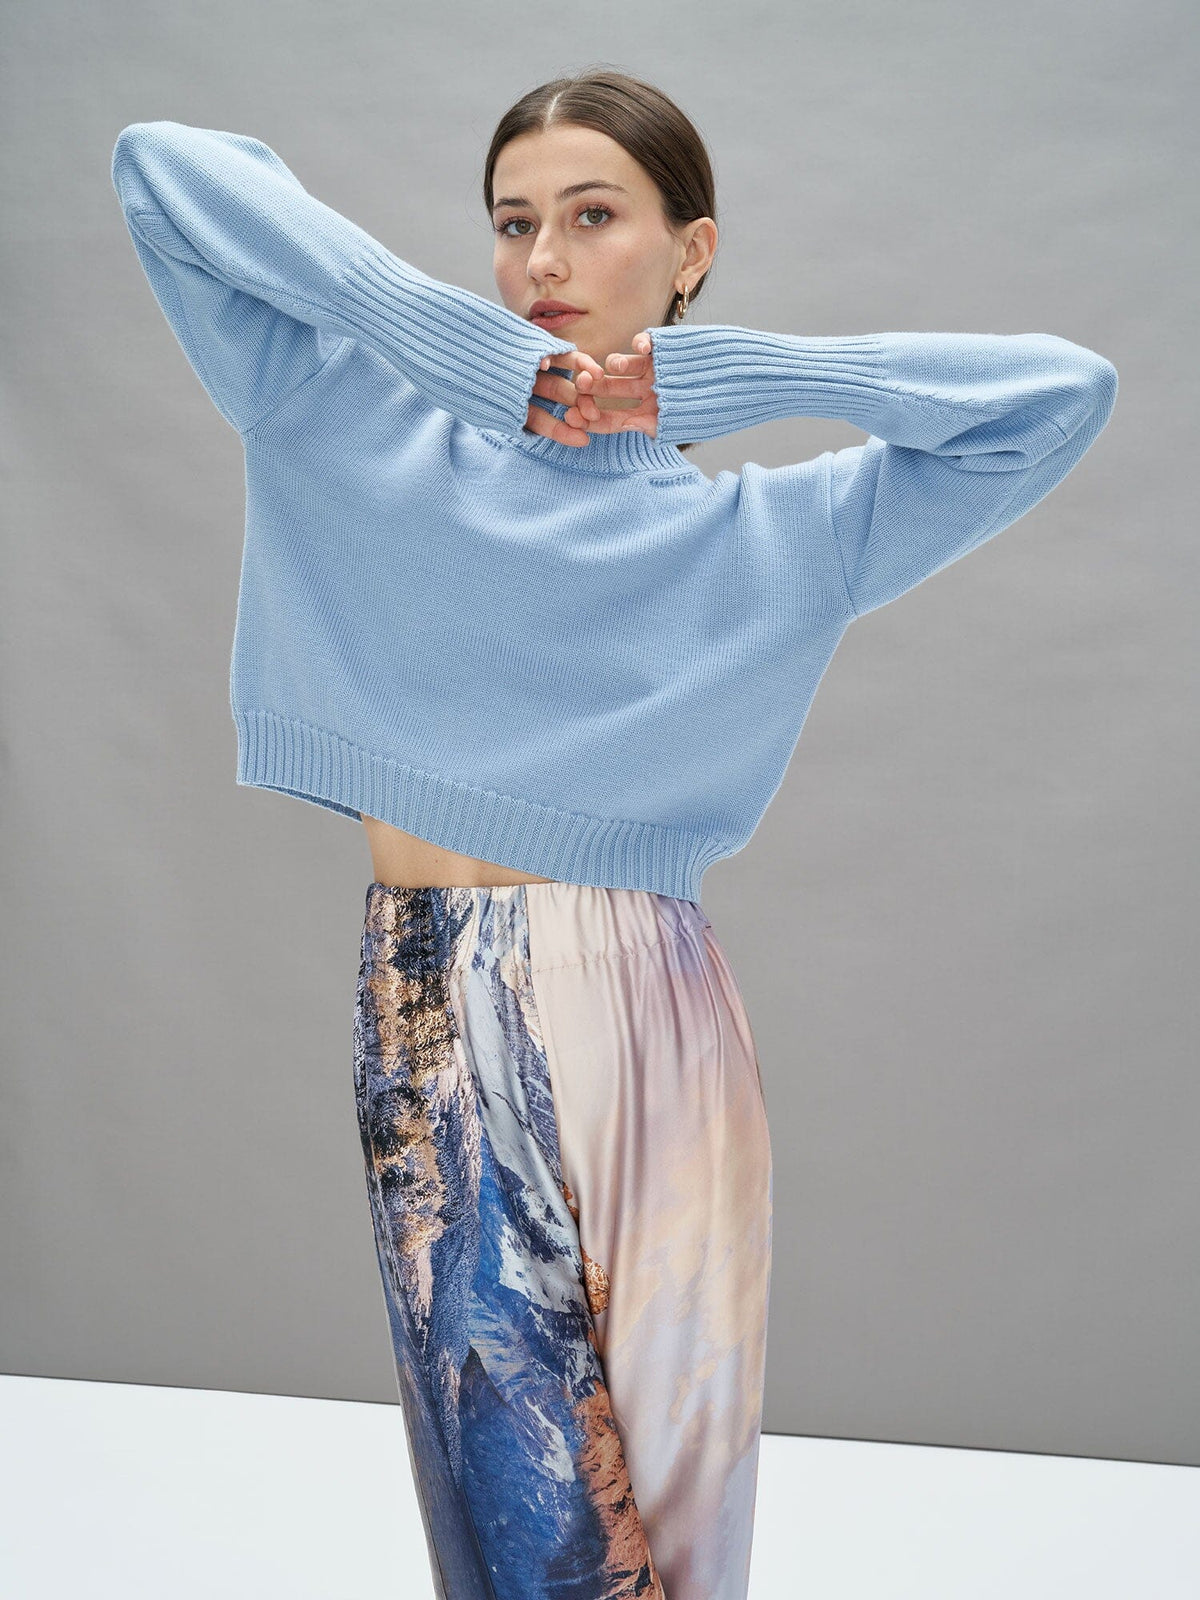 PULL SUN - Short sweater in Oeko Tex merino wool with Victorian-inspired sleeves and tightened cuffs Blue Sweater Fête Impériale